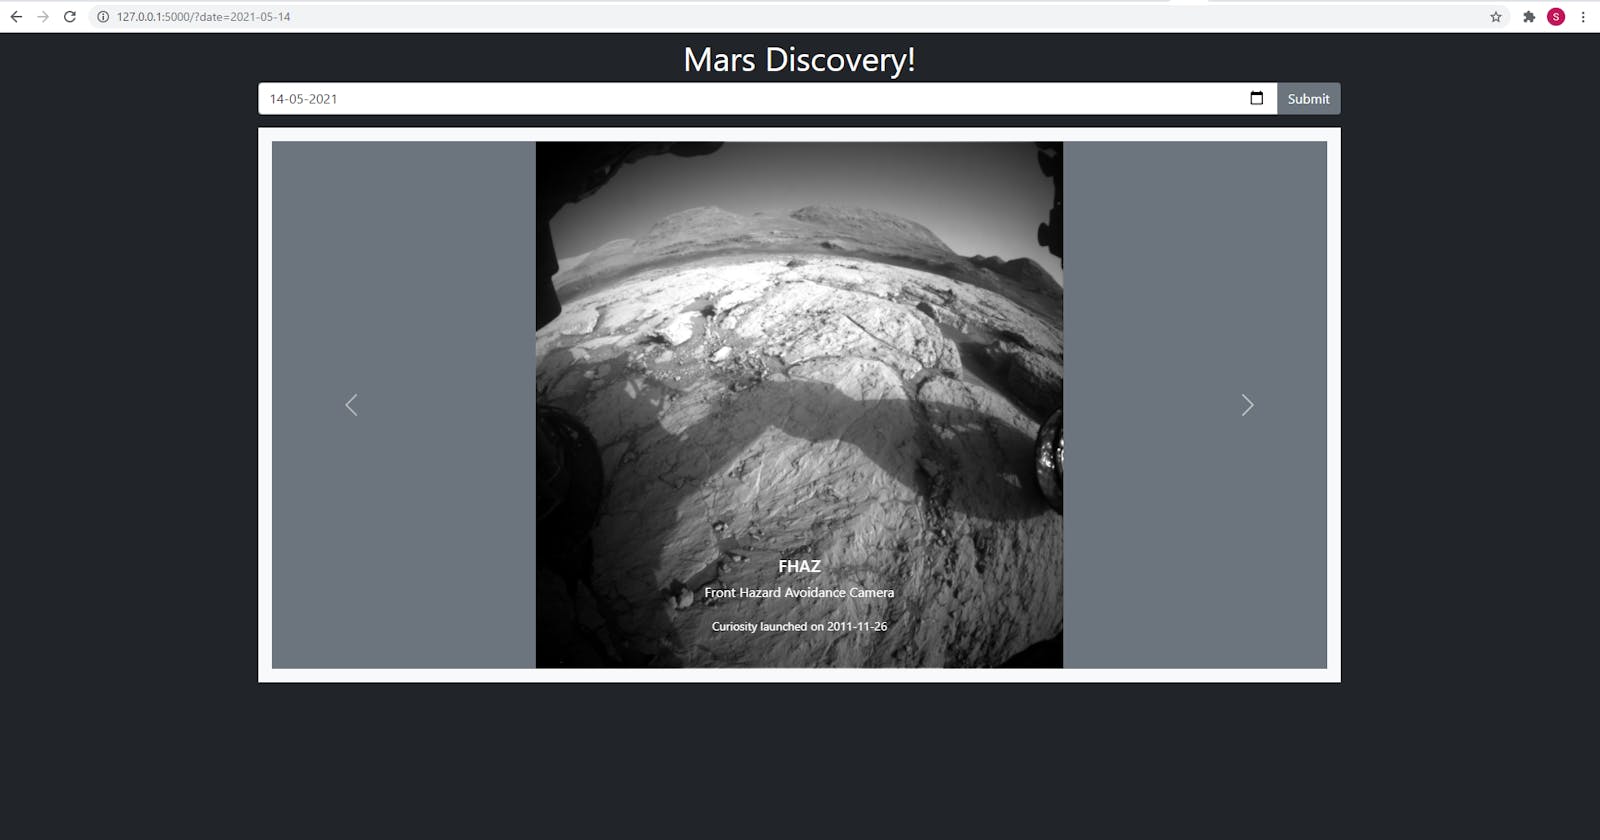 Creating a website to show pictures from Curiosity Mars Rover using NASA's API